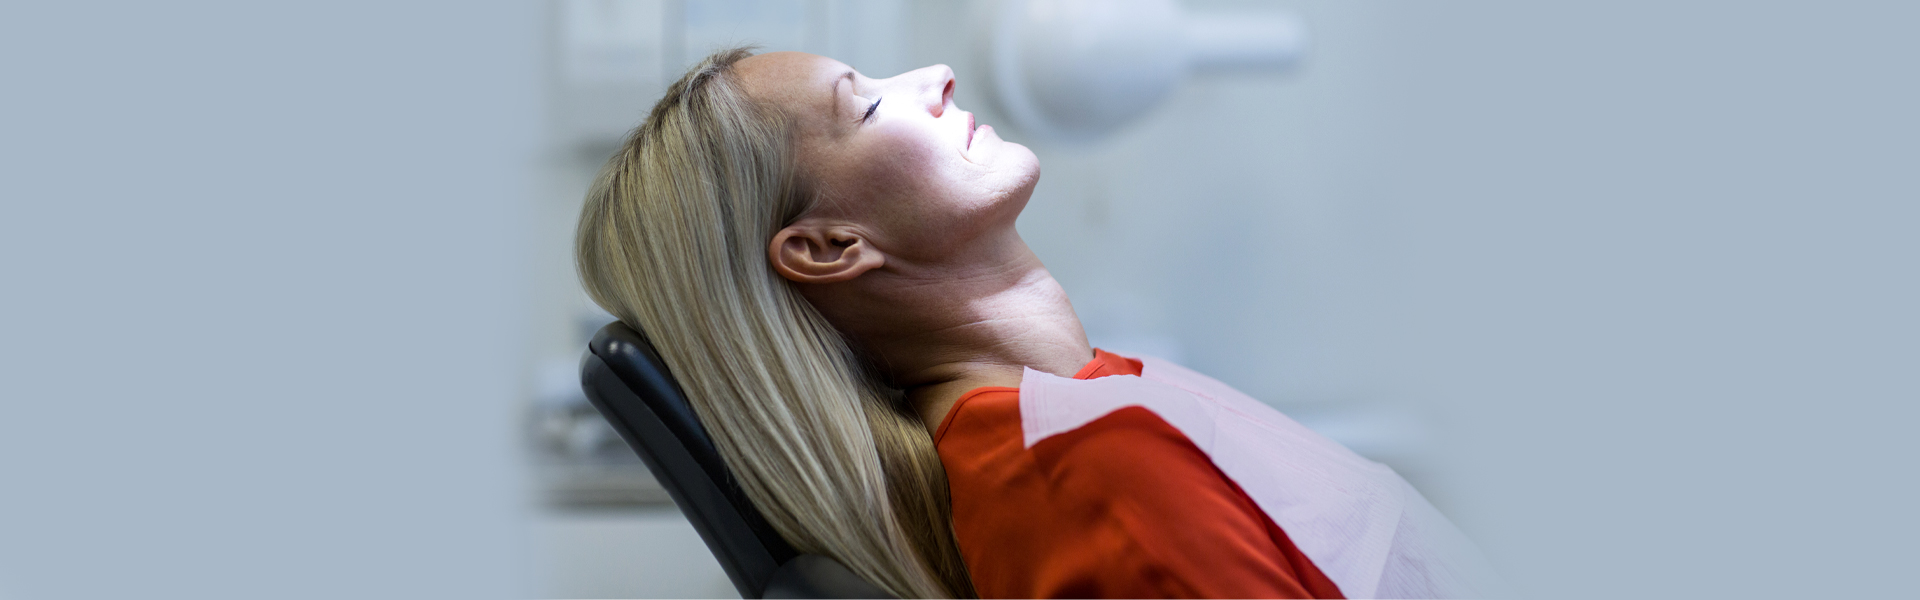 How Sedation Dentistry Helps Ease Dental Treatment in the Modern World?